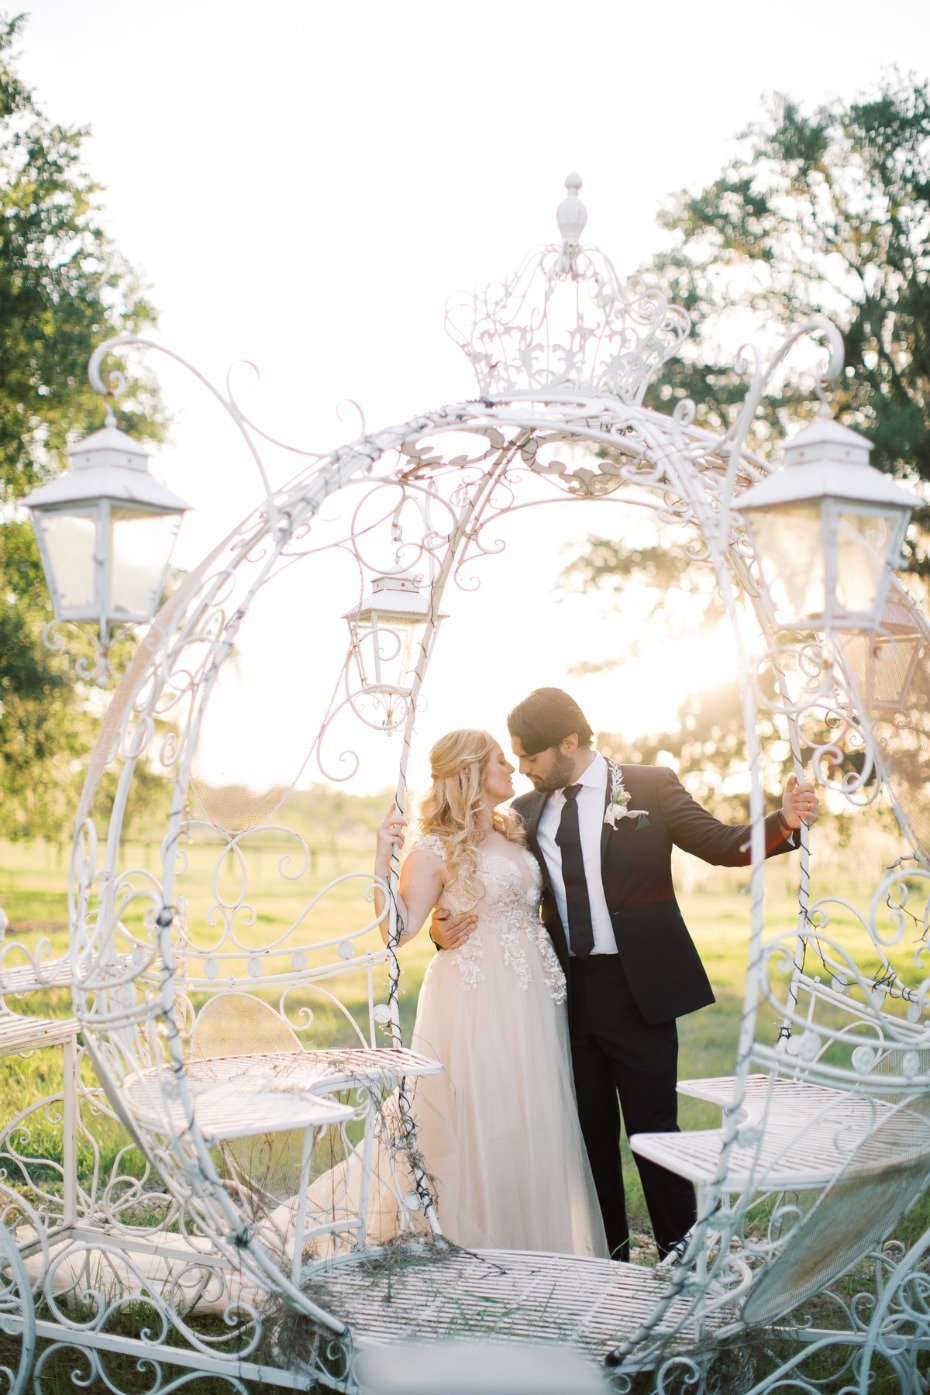 27 Unique Wedding Venues You Need To See